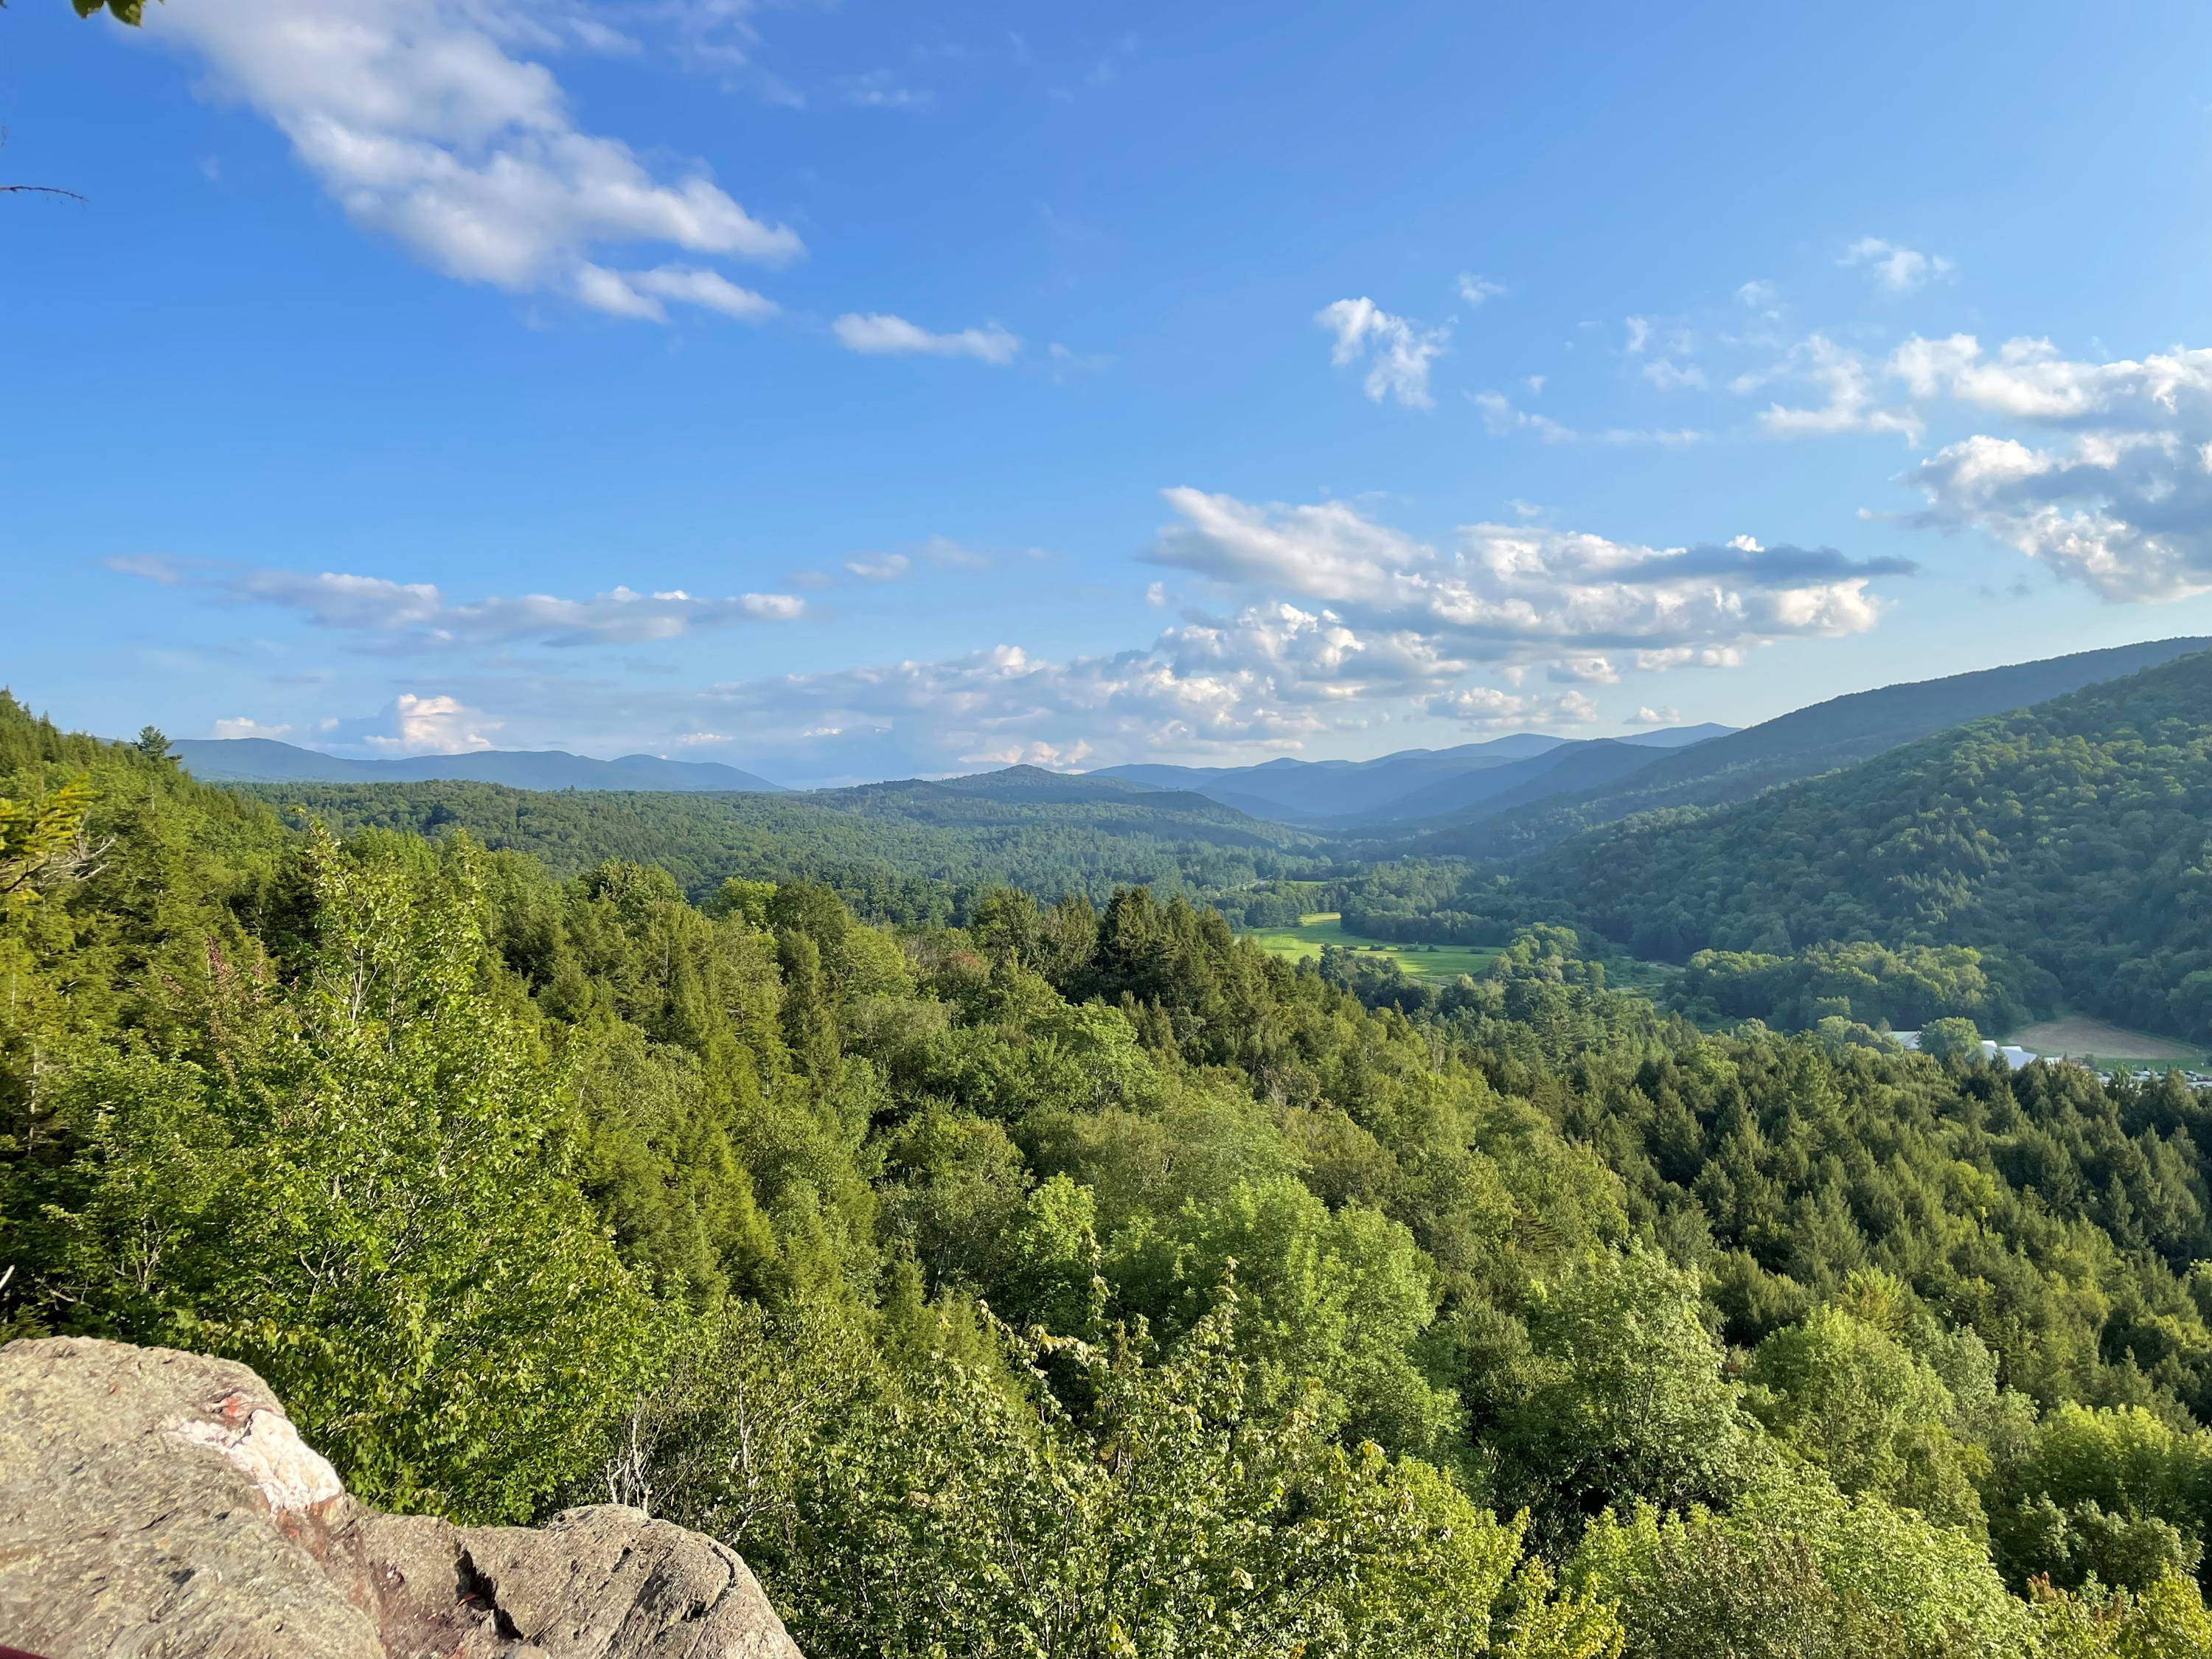 14 of the Best Catskills Hiking Trails for Every Level of Hiker